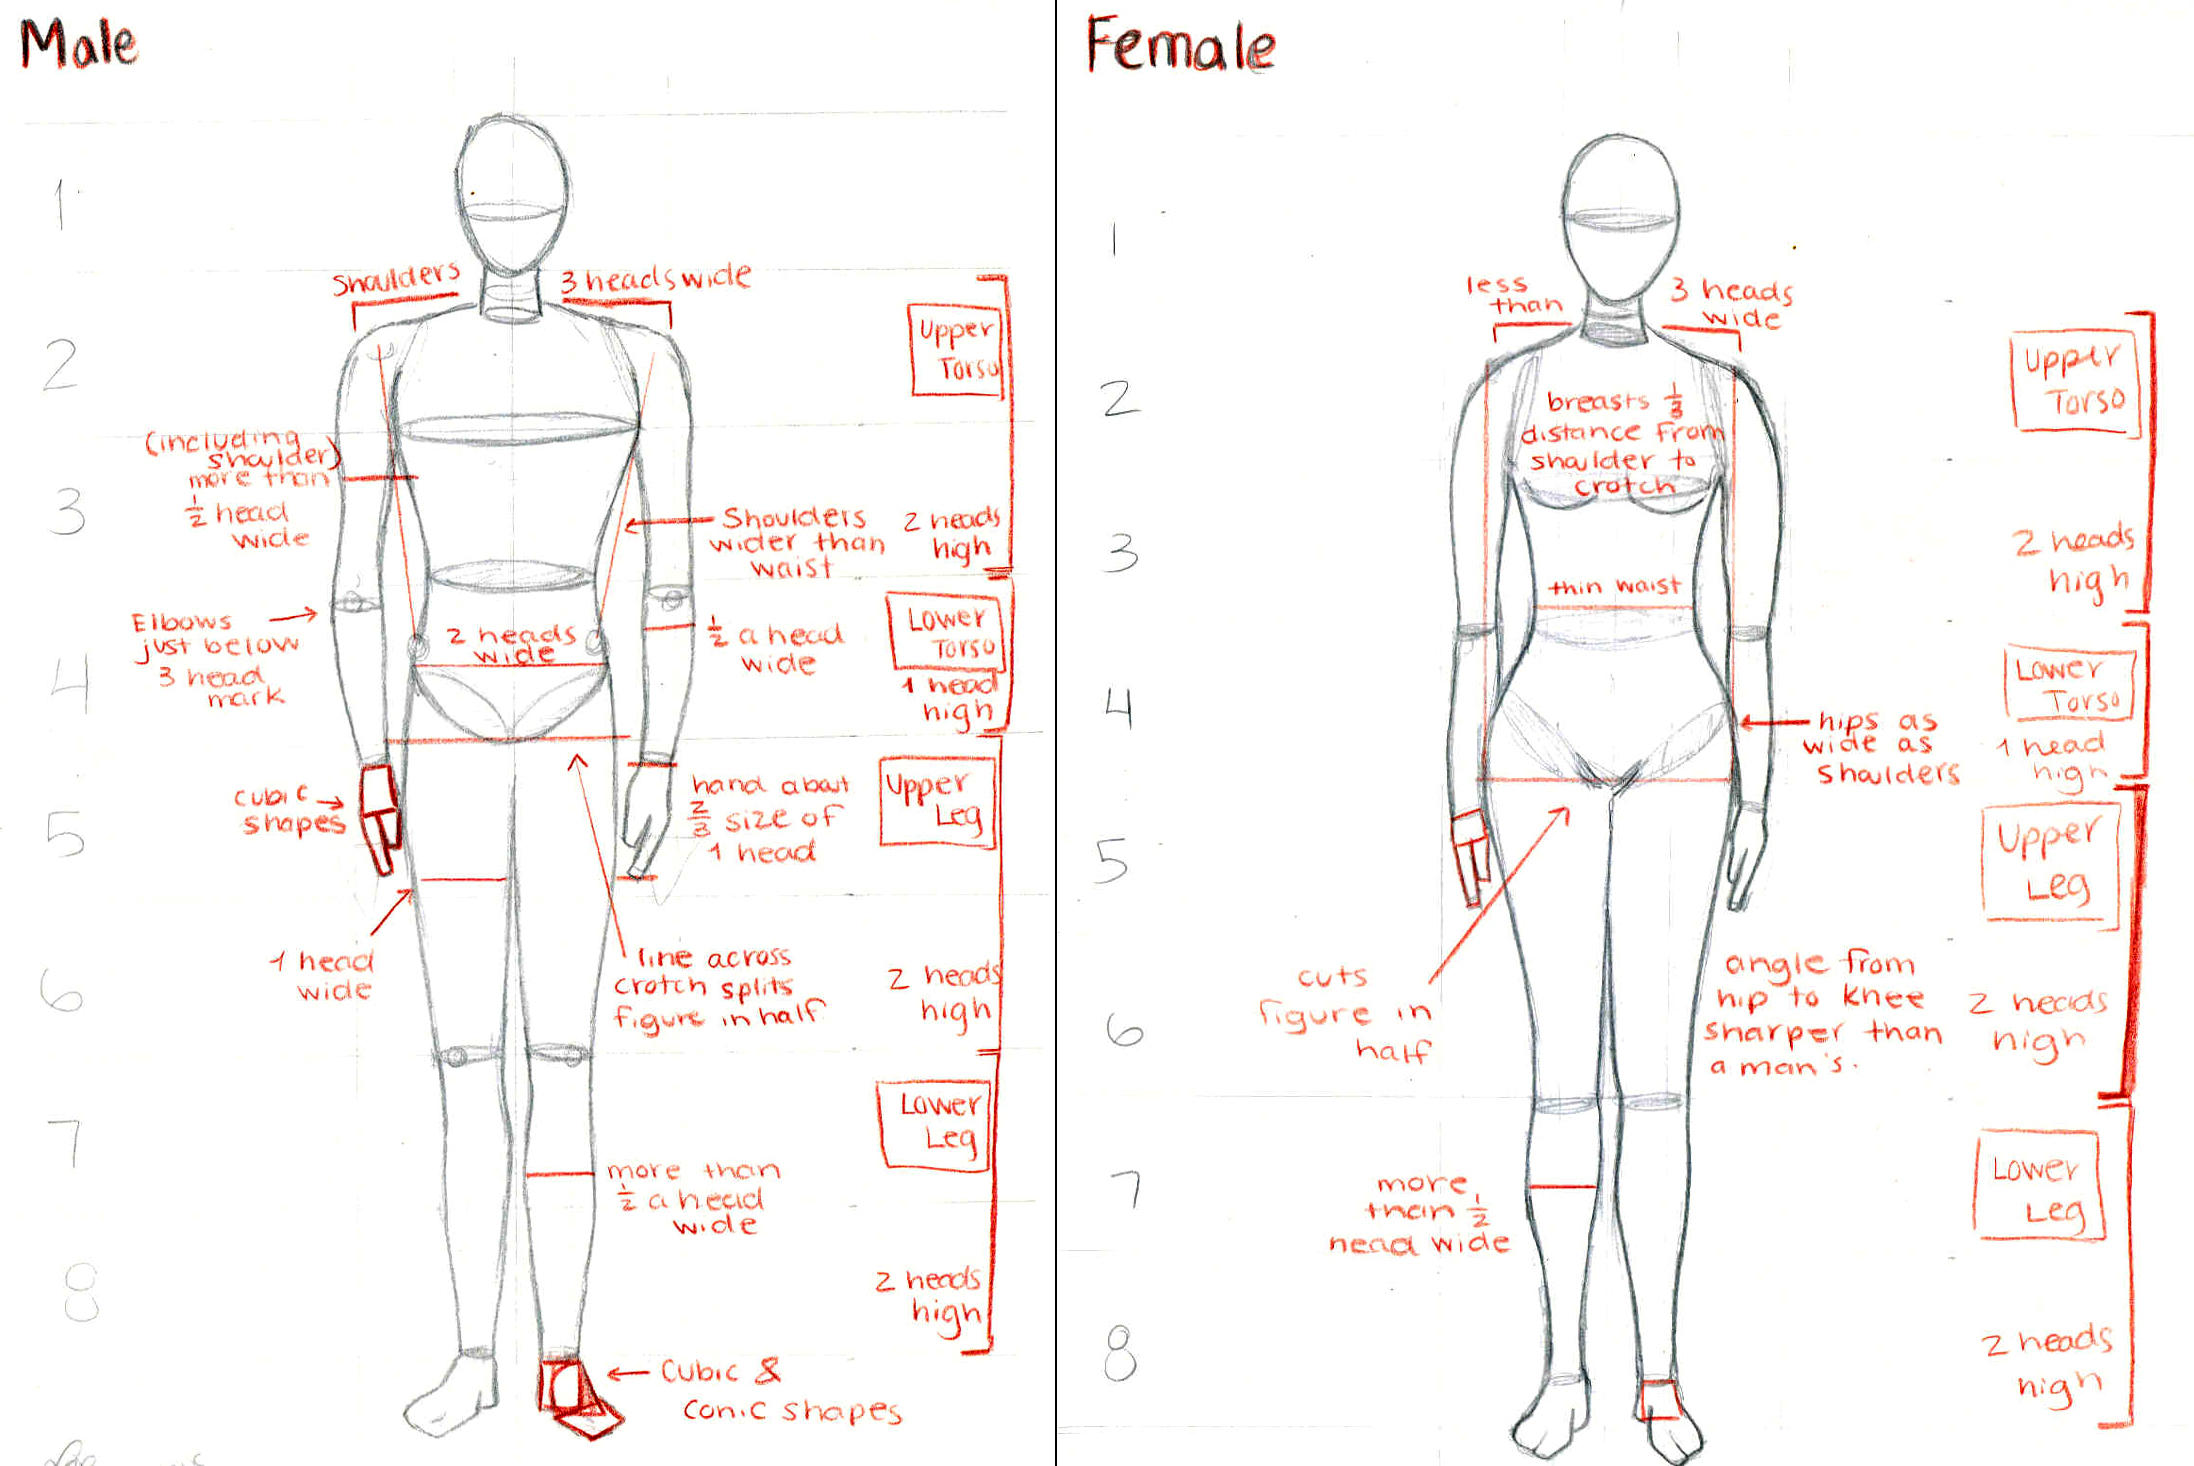 Male and Female Anatomy by lei-x on DeviantArt